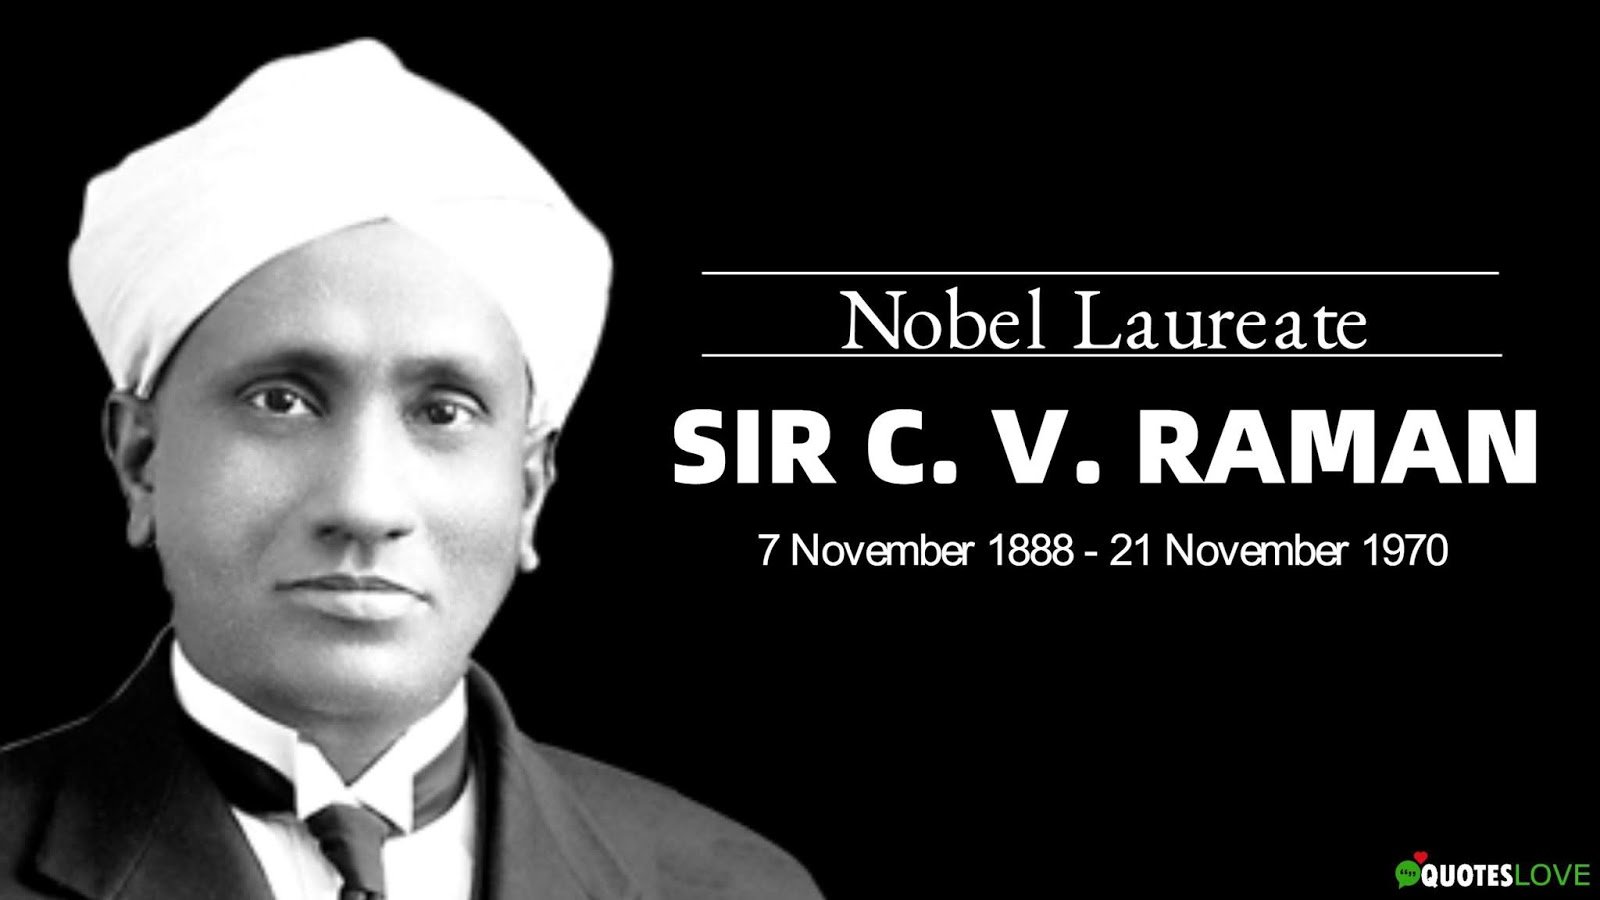 Best 10 C. V. Raman Quotes For National Science Day